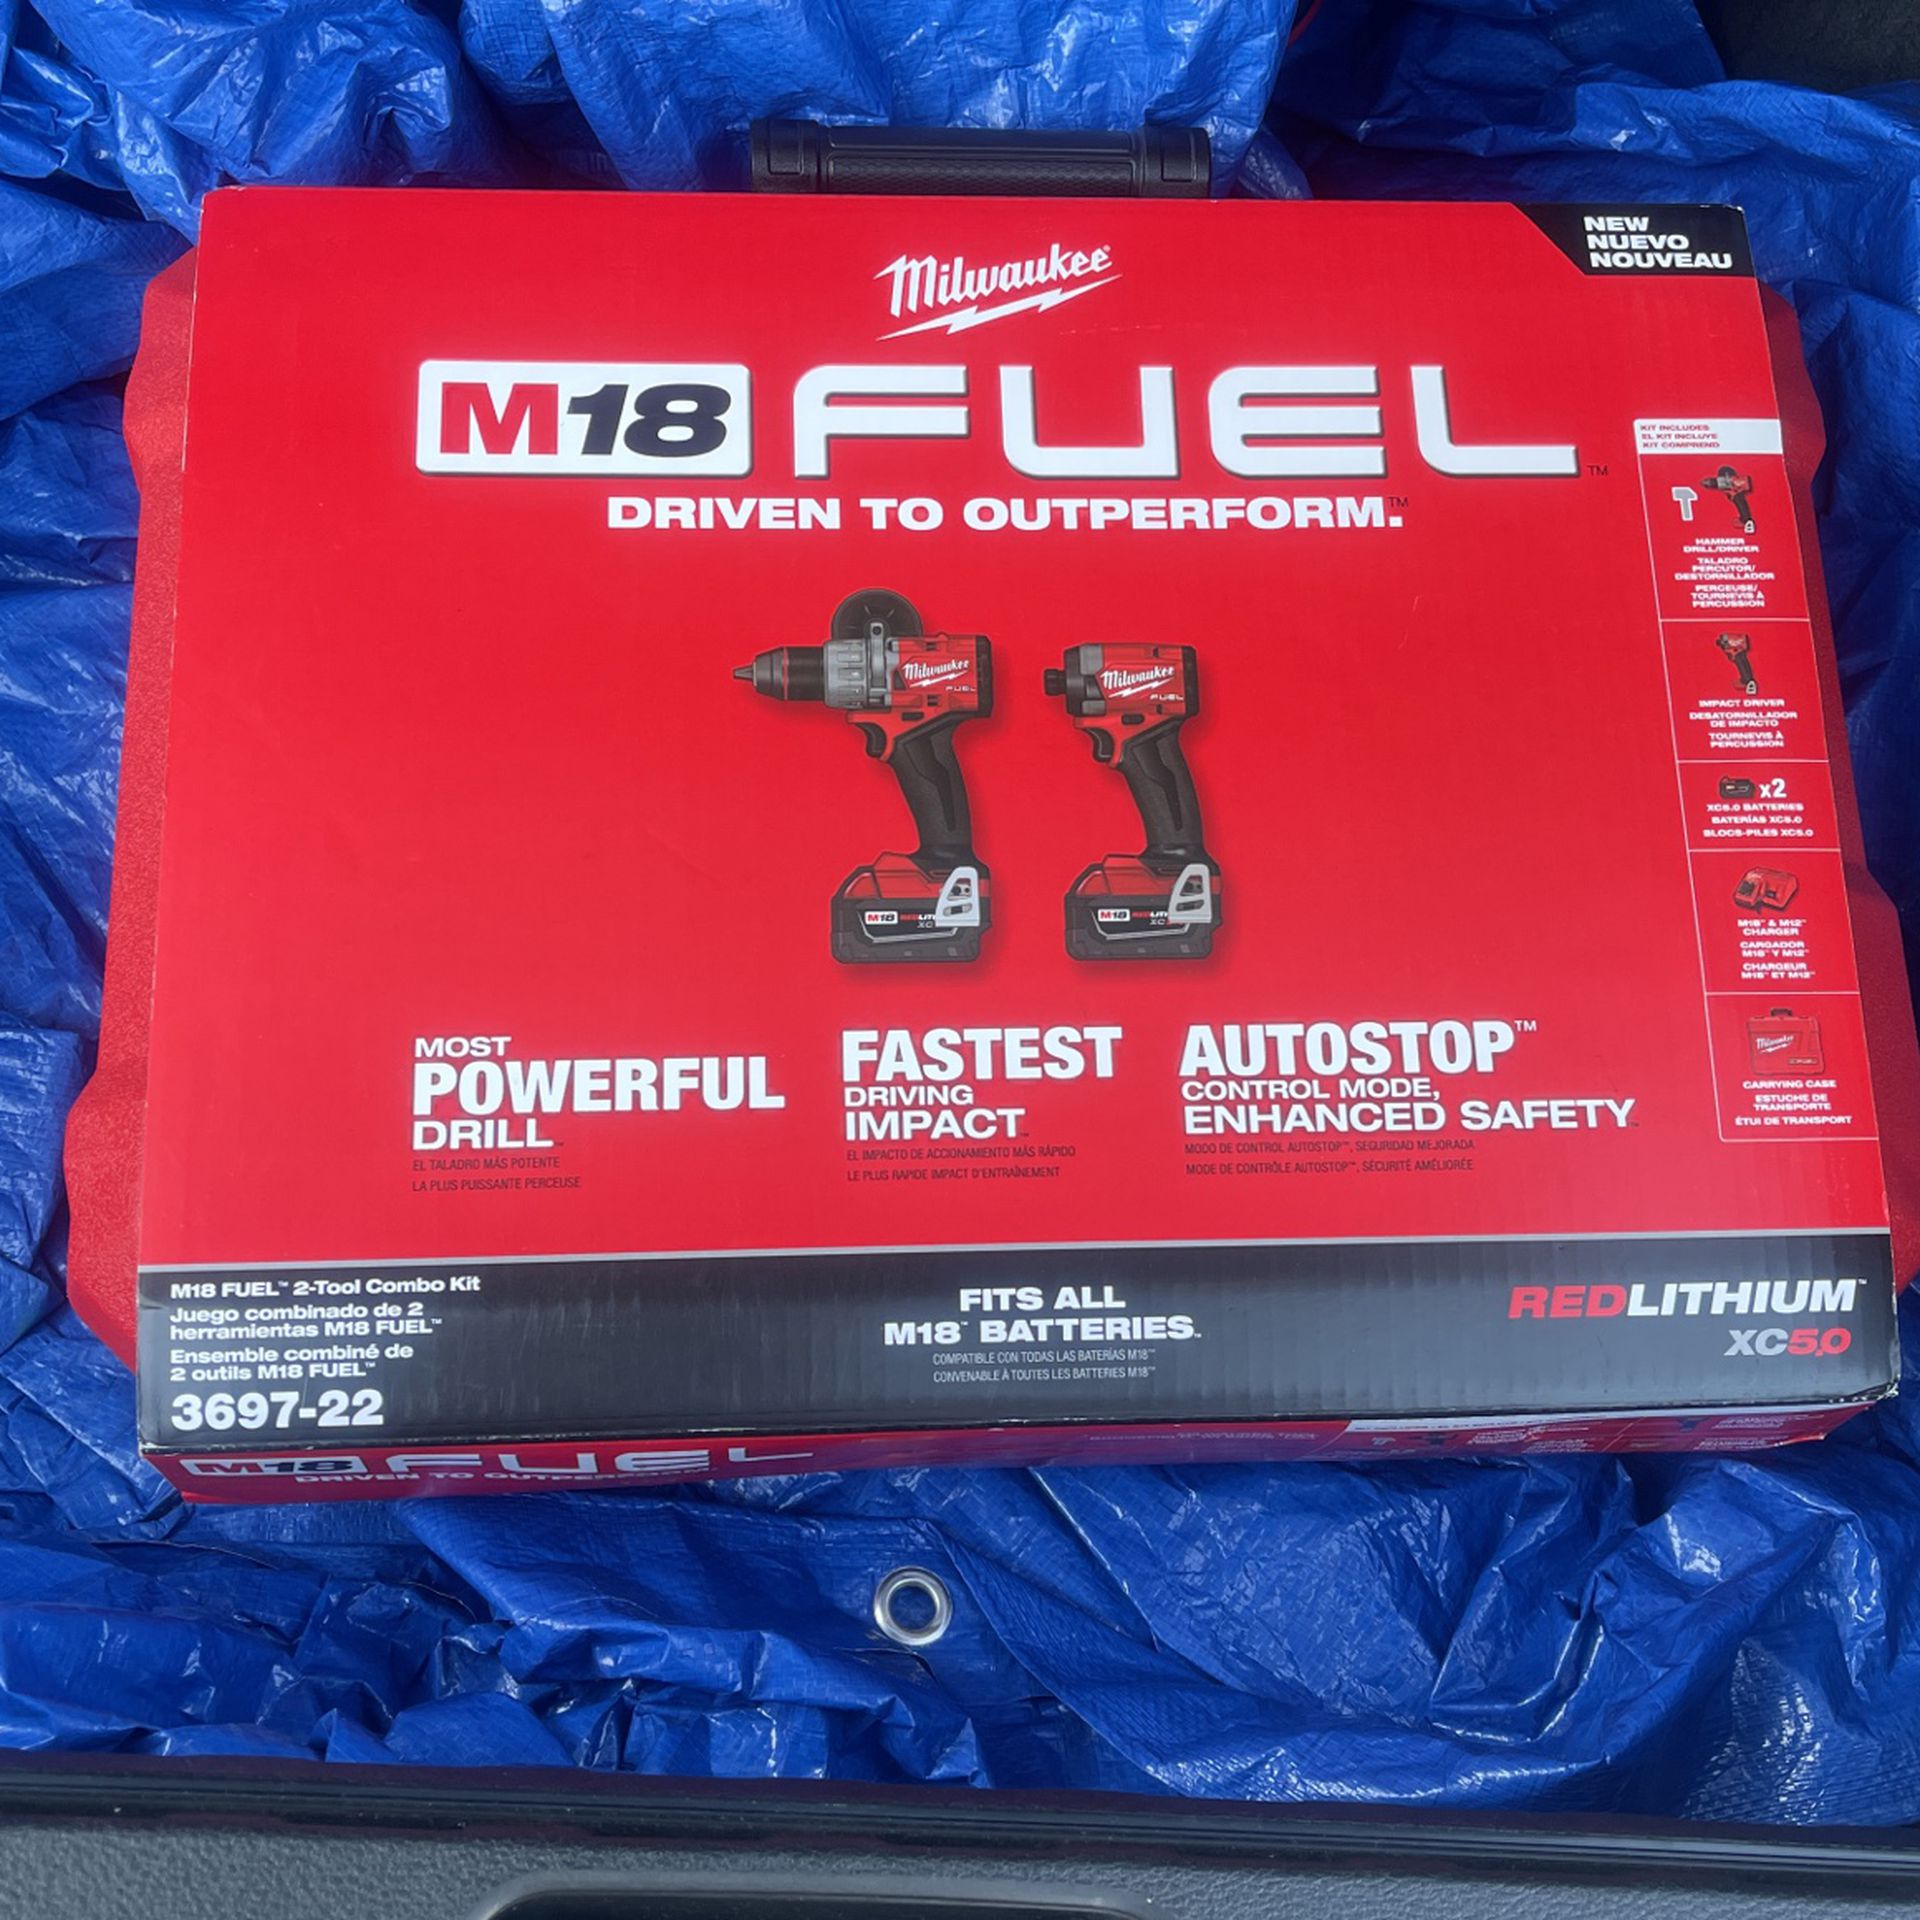 M18 Milwaukee FUEL DRIVEN TO OUTPERFORM.™